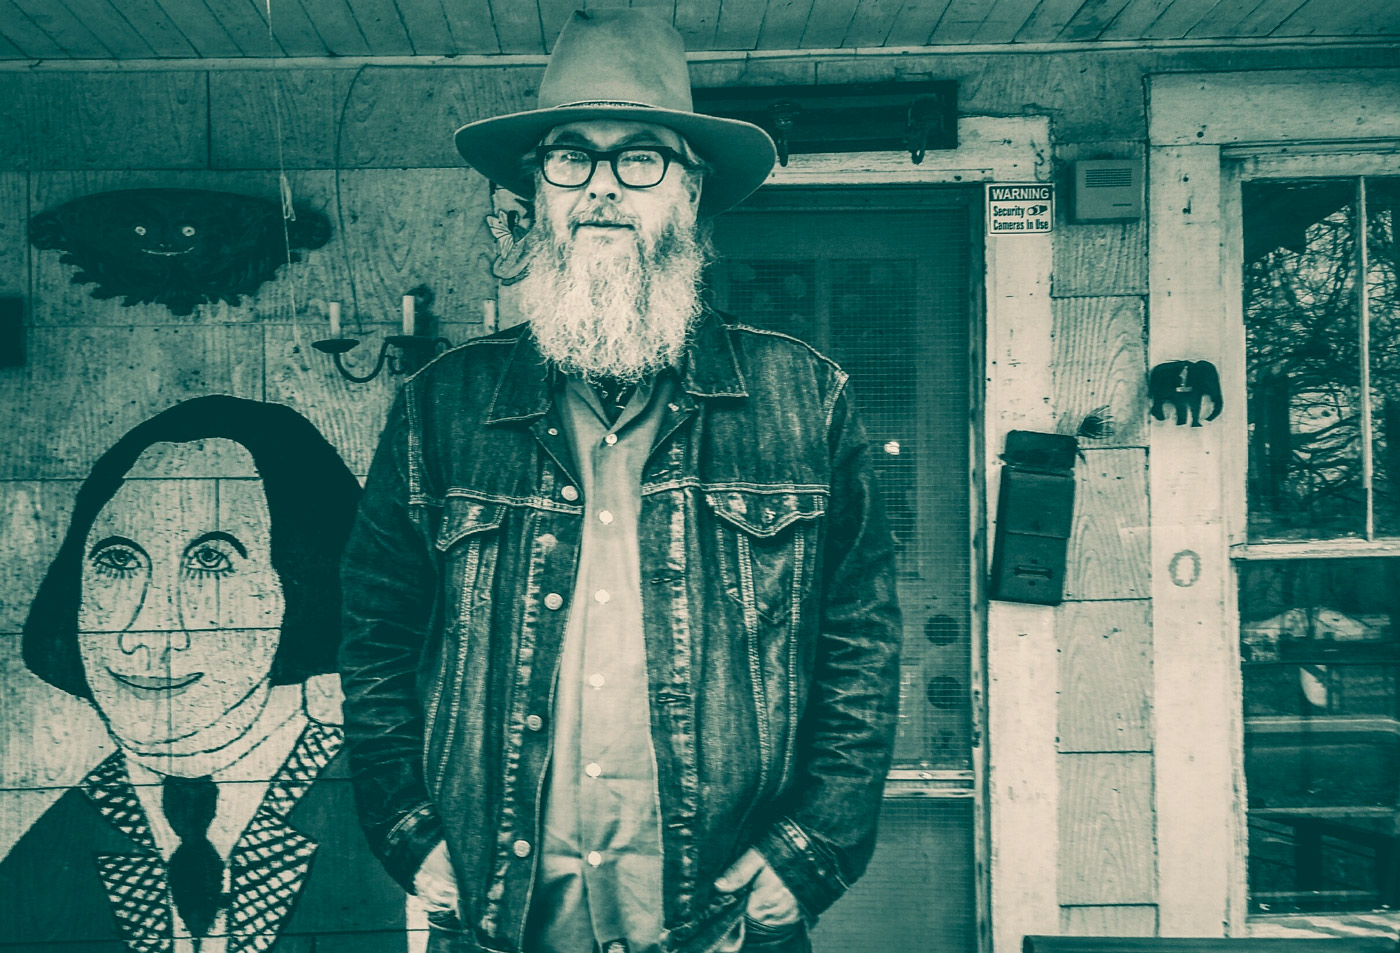 Otis Gibbs is a songwriter, storyteller, painter and photographer. He has been likened to everyone from Guthrie to Springsteen, but his rare voice stands on its own.